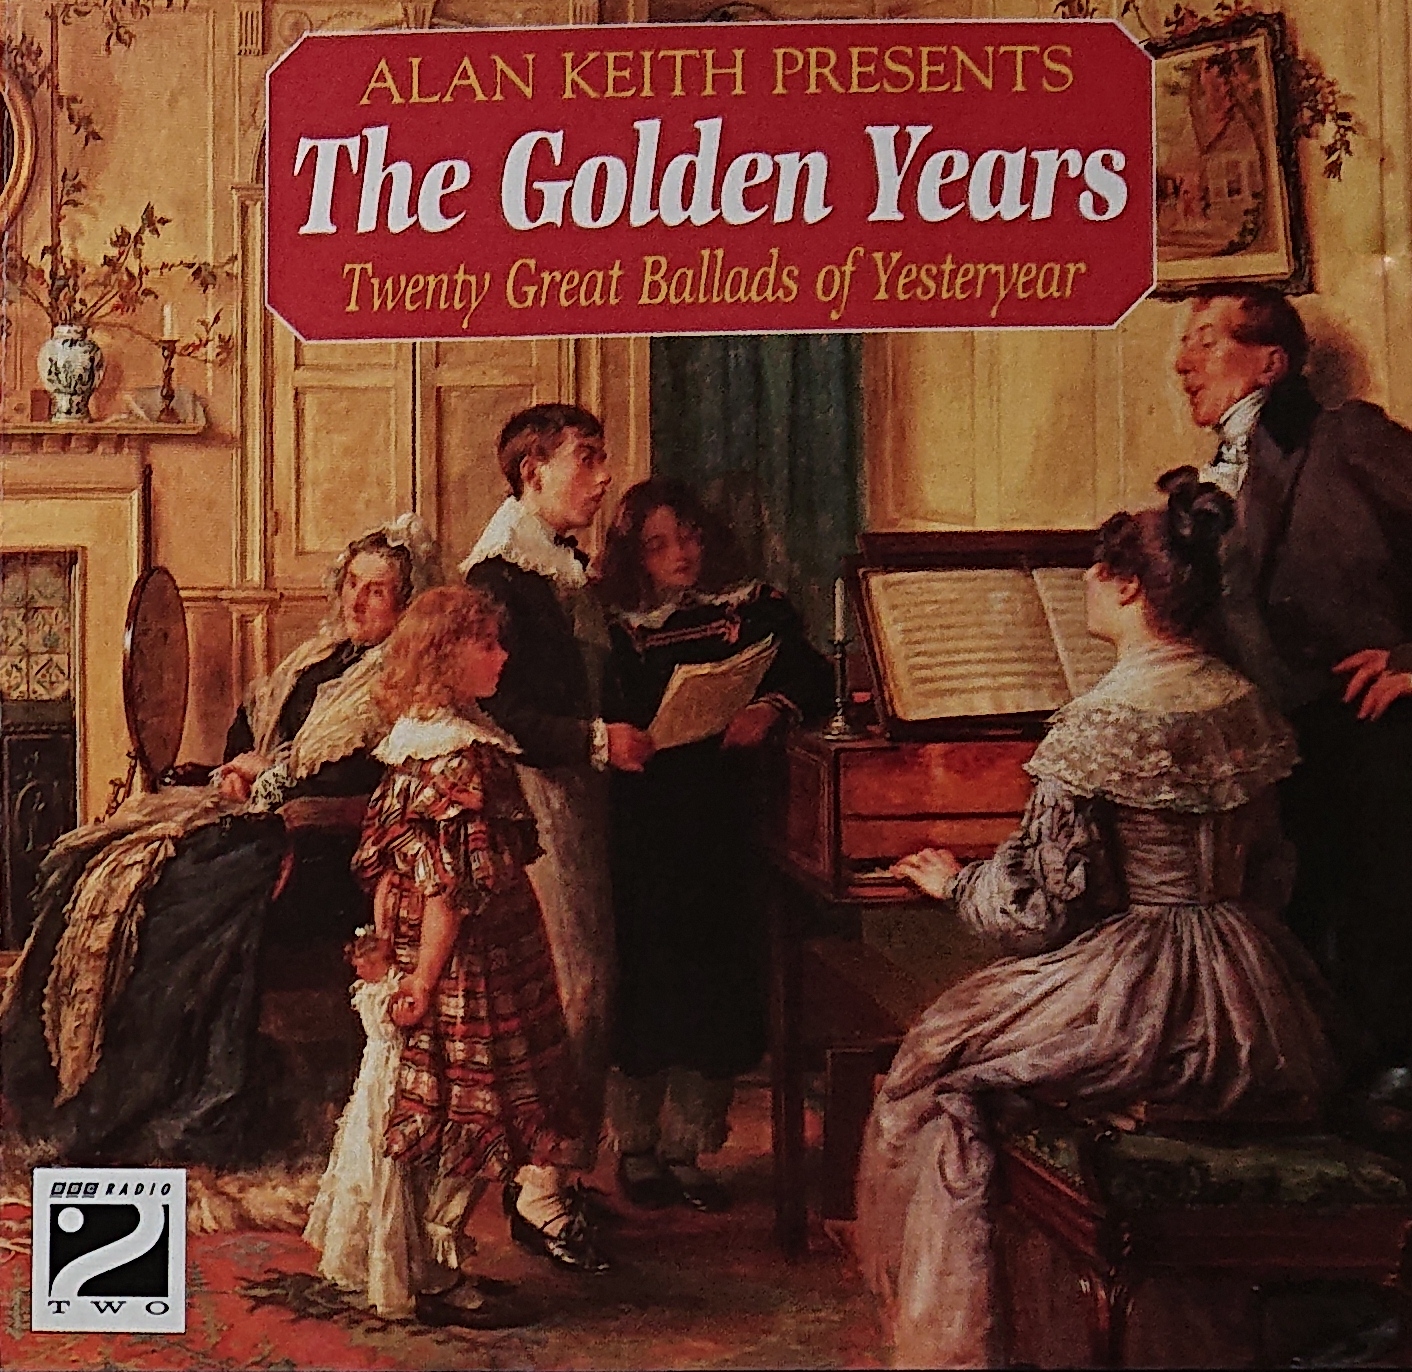 Picture of BBCCD796 The golden years by artist Alan Keith from the BBC records and Tapes library